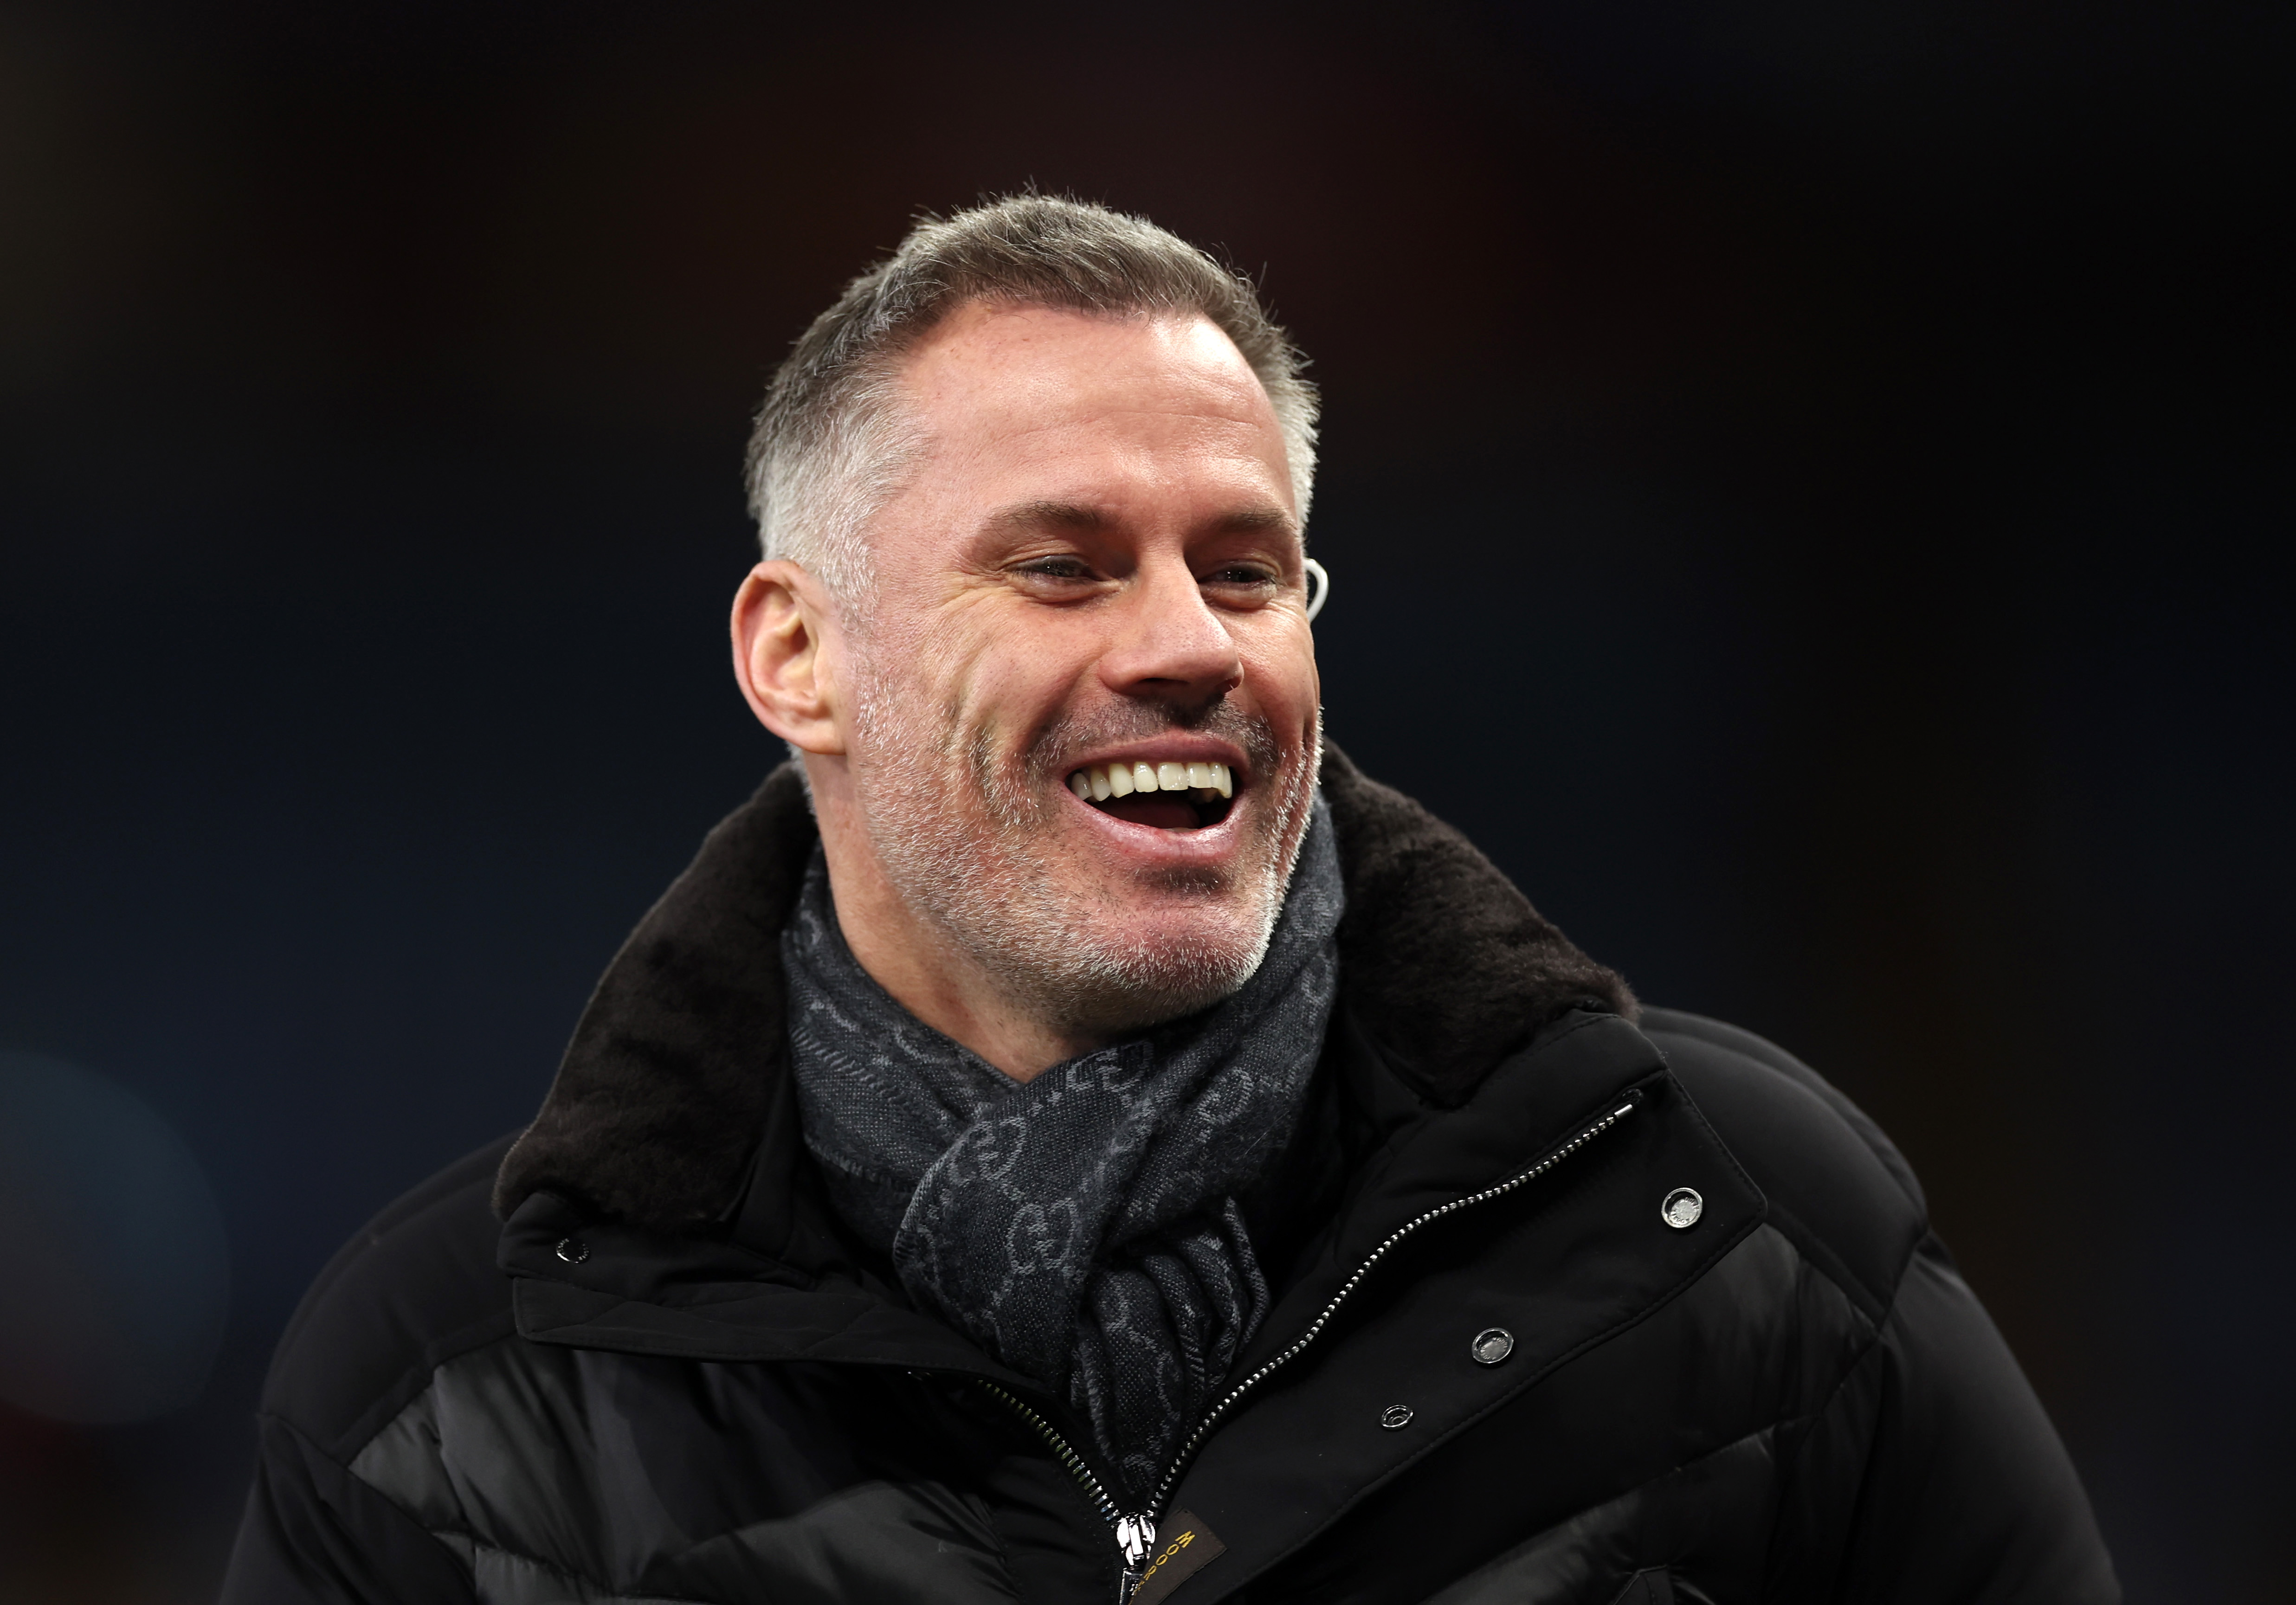 Jamie Carragher knows perfect man for Liverpool job; not Slot or Amorim